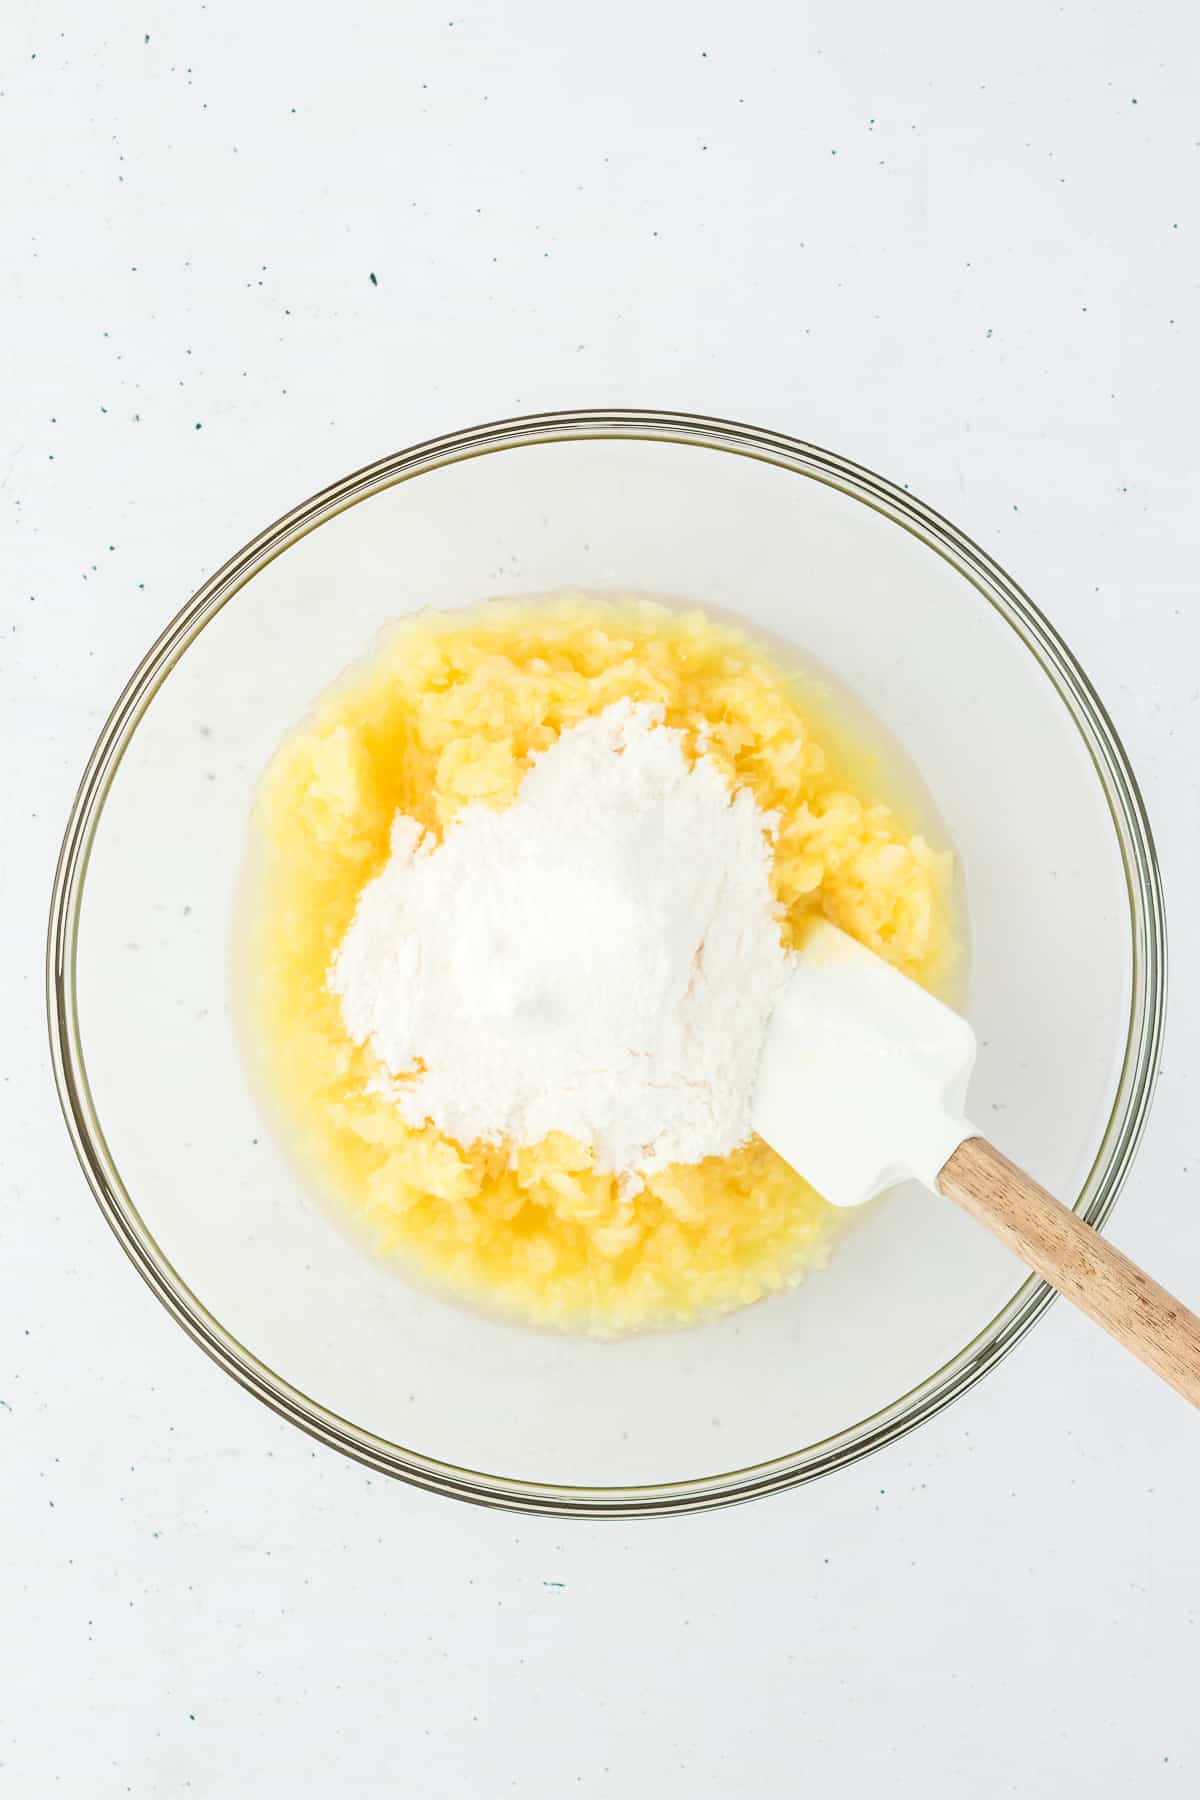 crushed pineapple and vanilla pudding mix in a clear glass bowl with a spatula in it